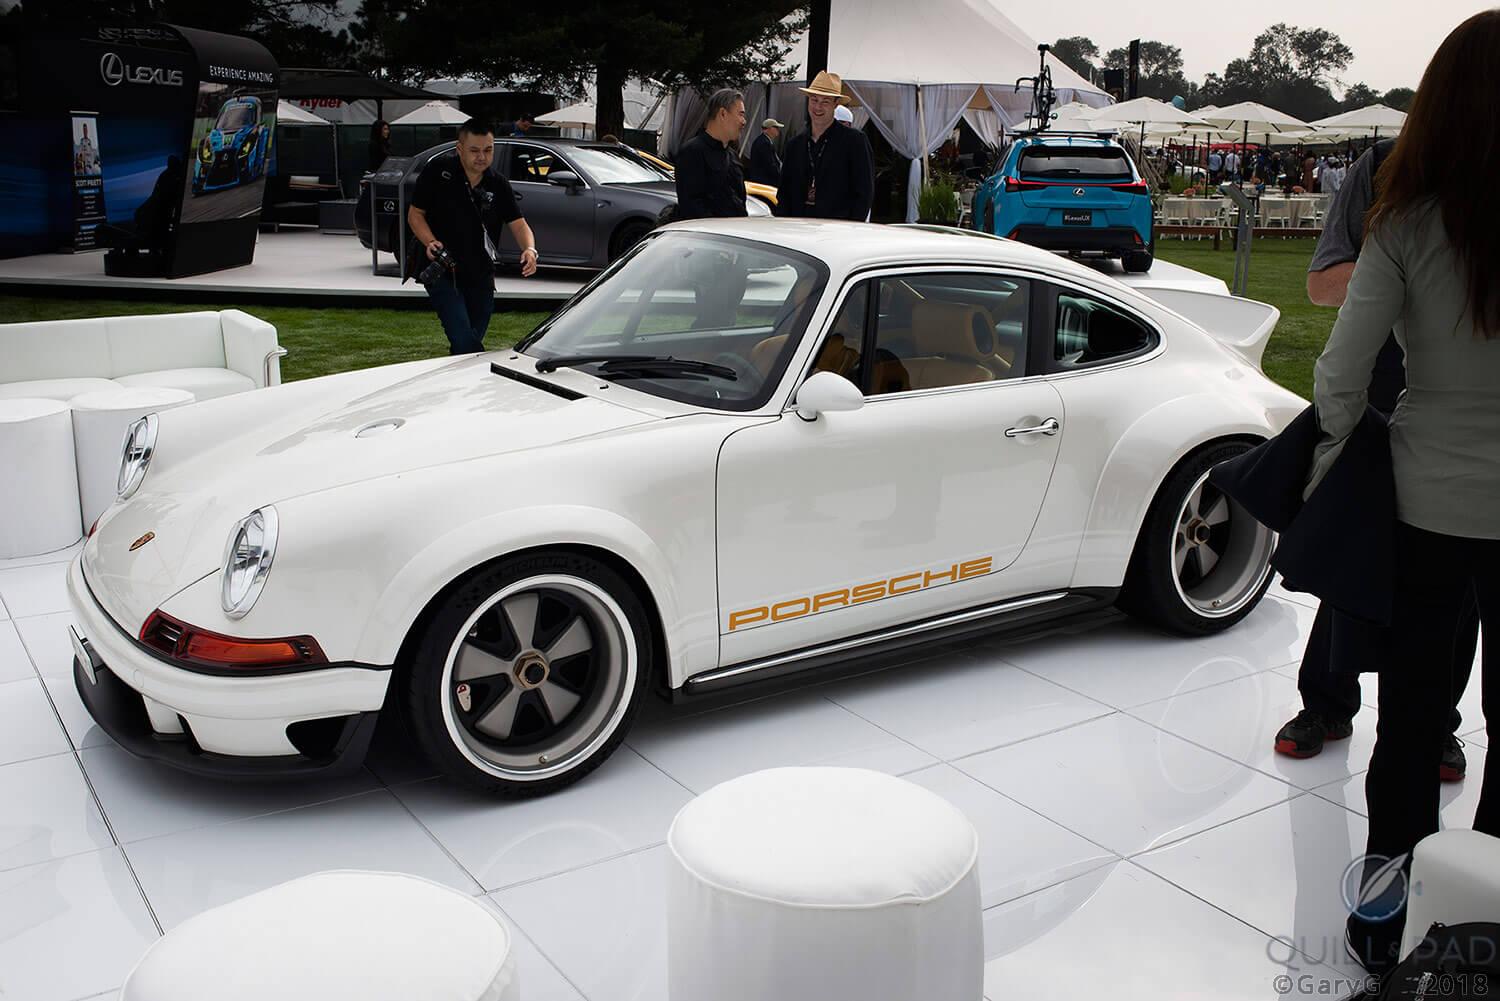 The Porsche 911 Dynamics and Lightweighting Study (DLS) by Singer Vehicle Design